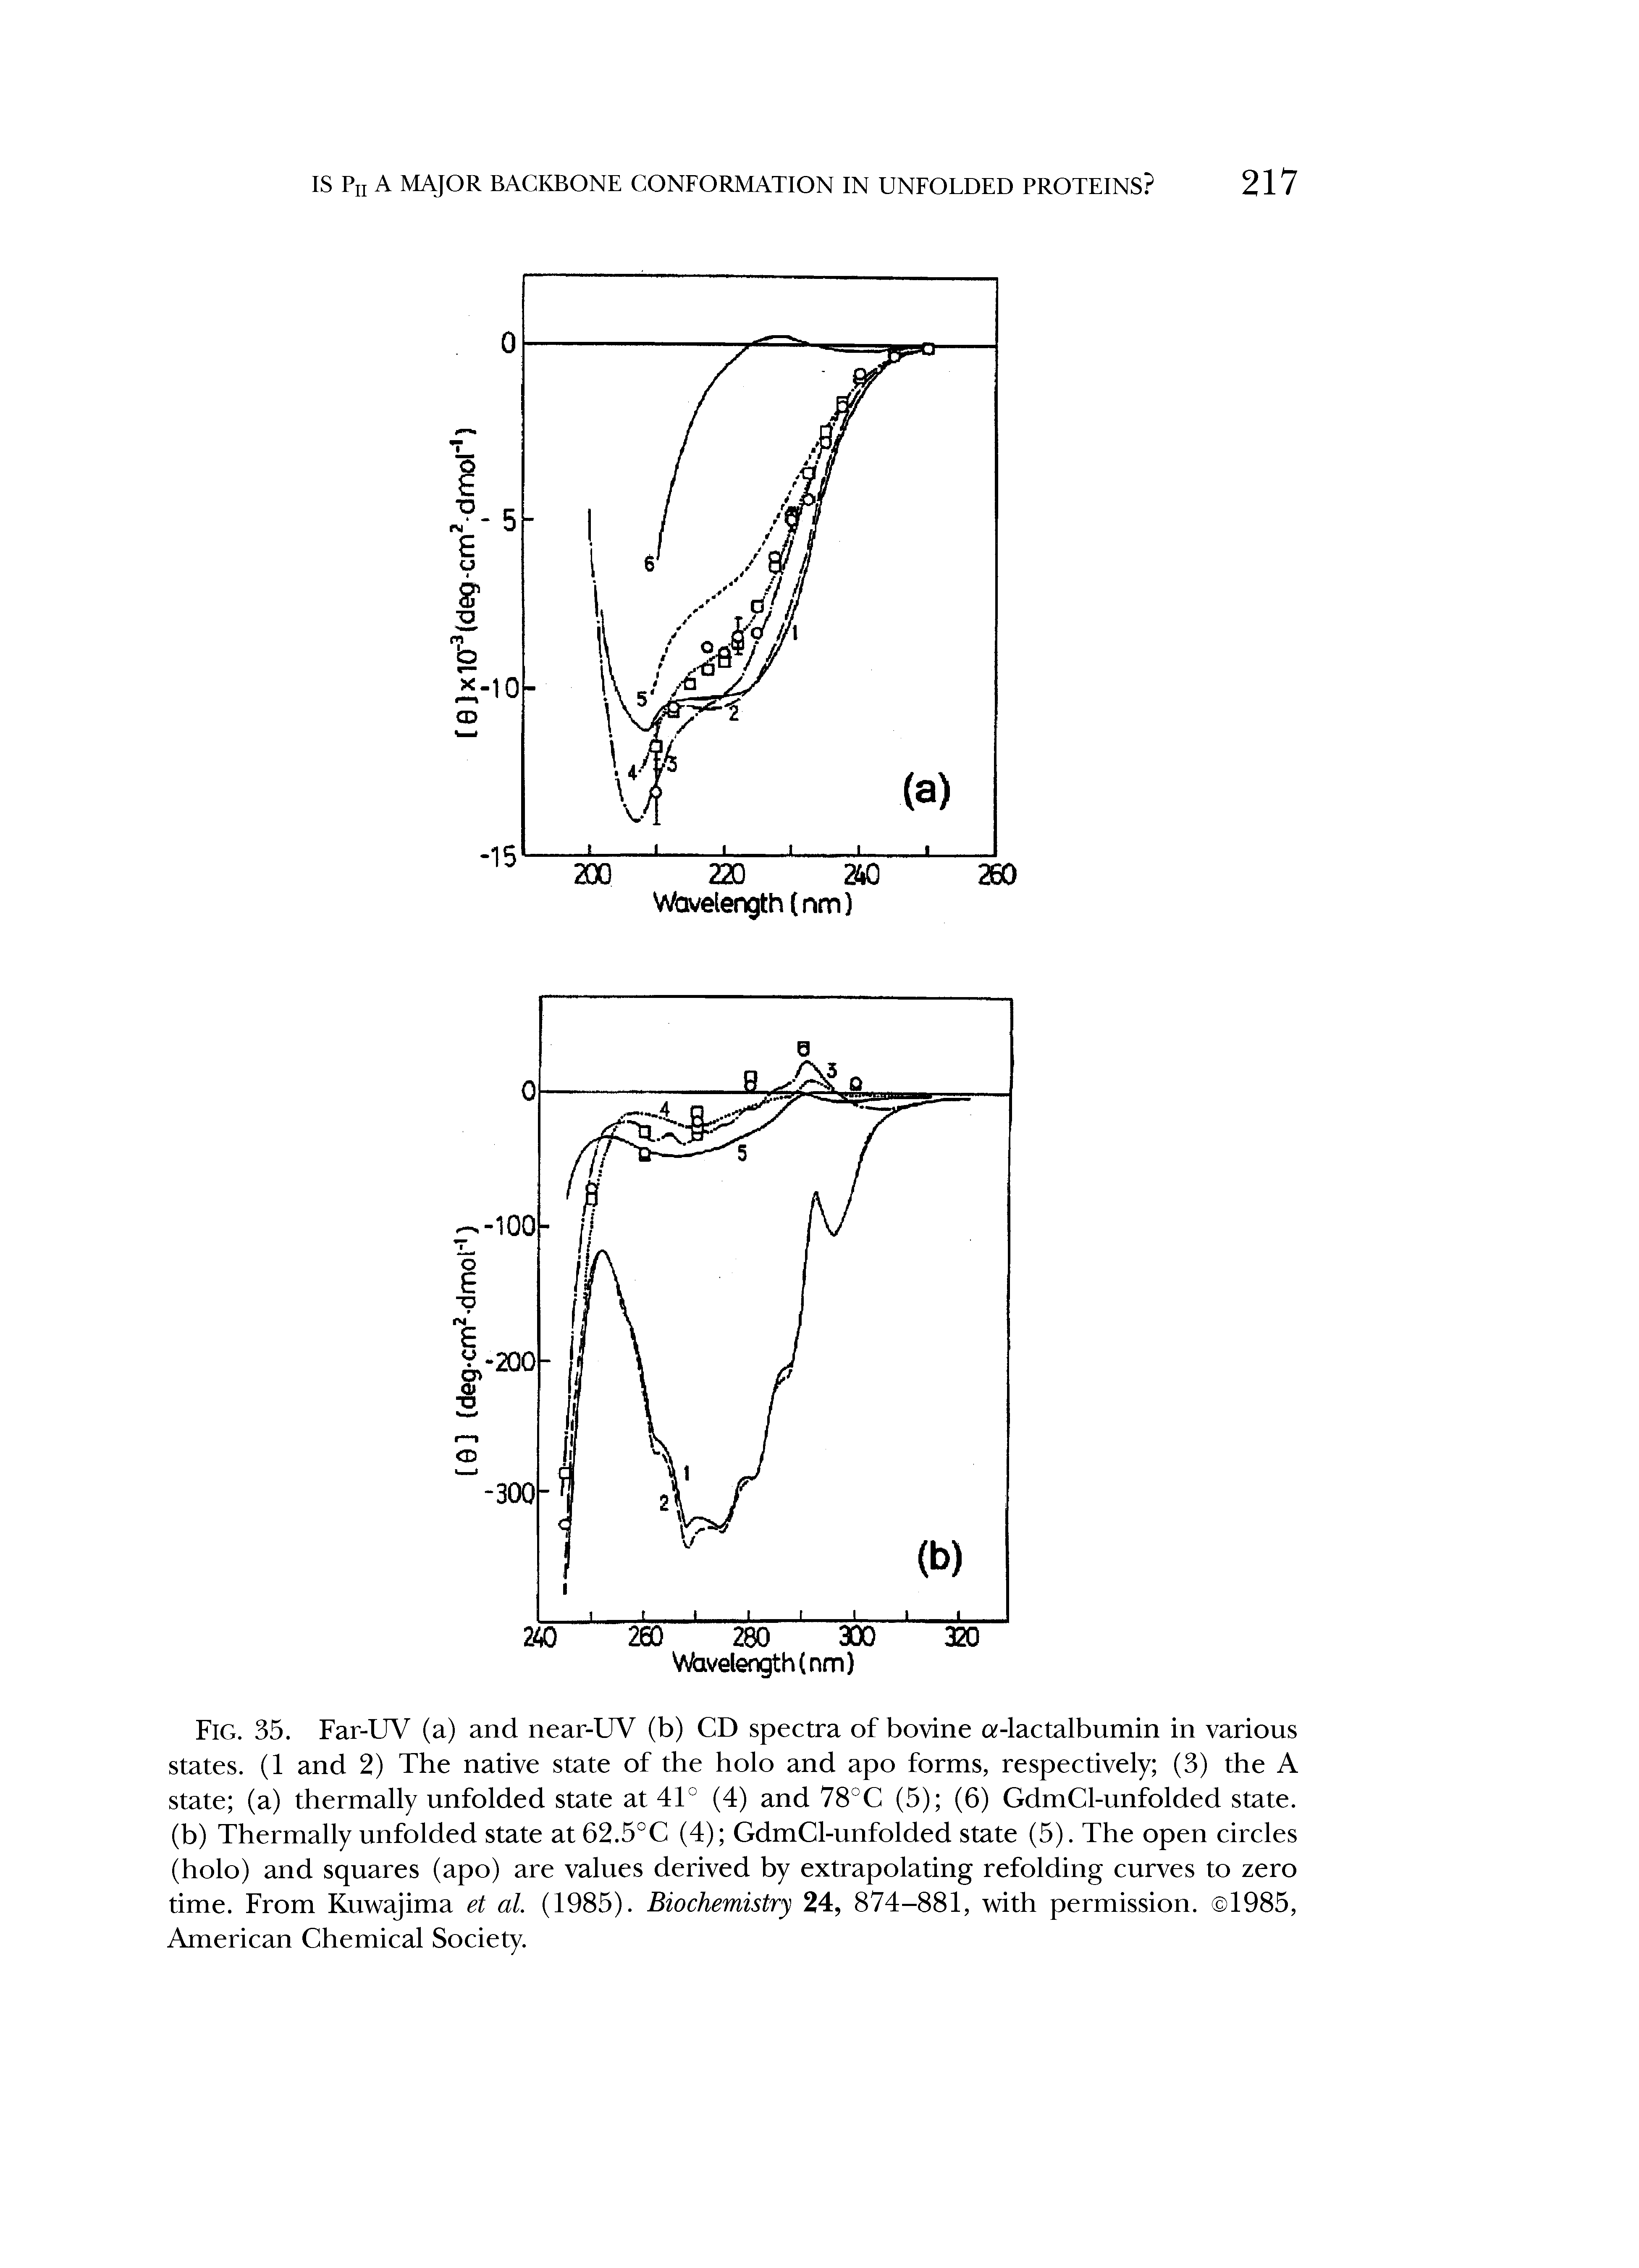 Fig. 35. Far-UV (a) and near-UV (b) CD spectra of bovine Q -lactalbumin in various states. (1 and 2) The native state of the holo and apo forms, respectively (3) the A state (a) thermally unfolded state at 41° (4) and 78°C (5) (6) GdmCl-unfolded state, (b) Thermally unfolded state at 62.5°C (4) GdmCl-unfolded state (5). The open circles (holo) and squares (apo) are values derived by extrapolating refolding curves to zero time. From Kuwajima et al. (1985). Biochemistry 24, 874-881, with permission. 1985, American Chemical Society.